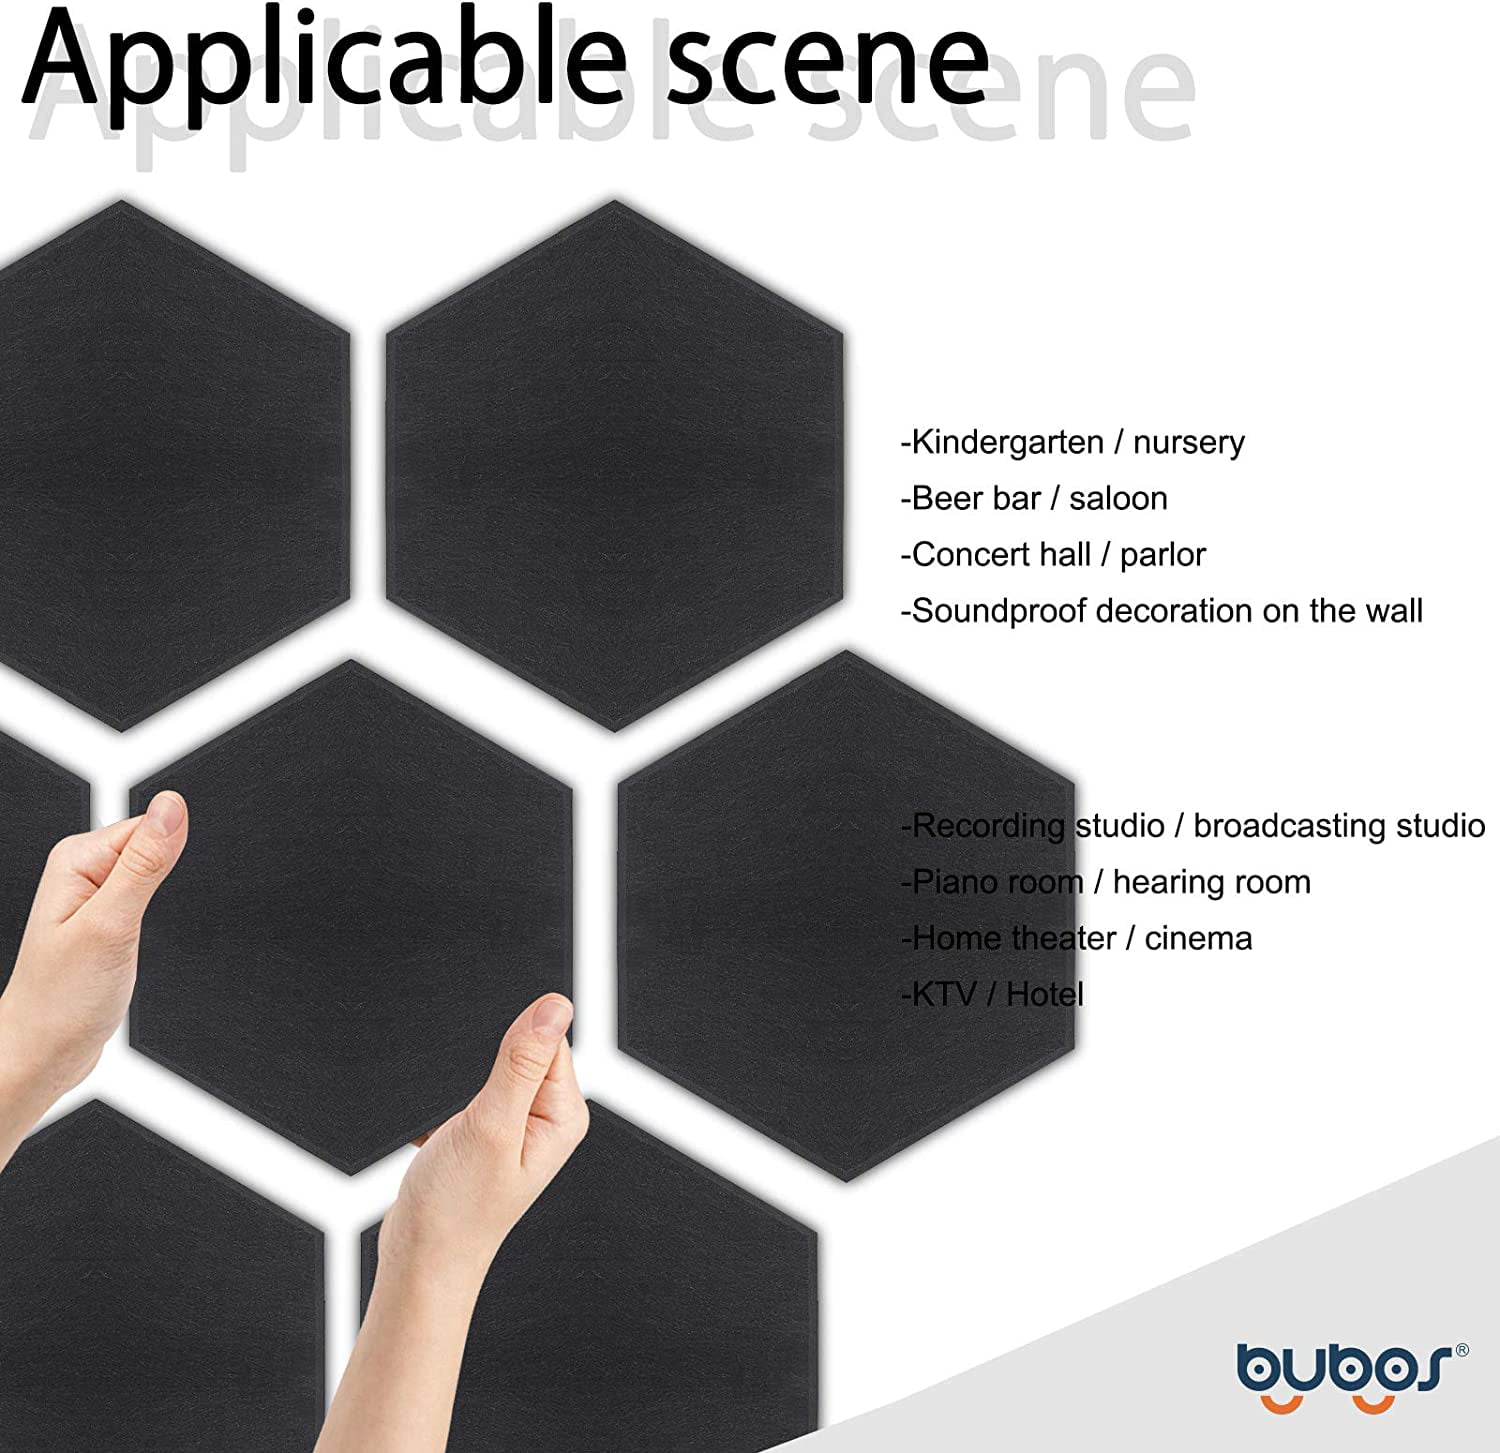 BUBOS 12 Pack Hexagon Acoustic Panels Soundproof Wall Panels,14 X 13 X 0.4Inches Sound Absorbing Panels Acoustical Wall Panels Home Studio,Silver Grey Office Acoustic Treatment for Recording Studio 